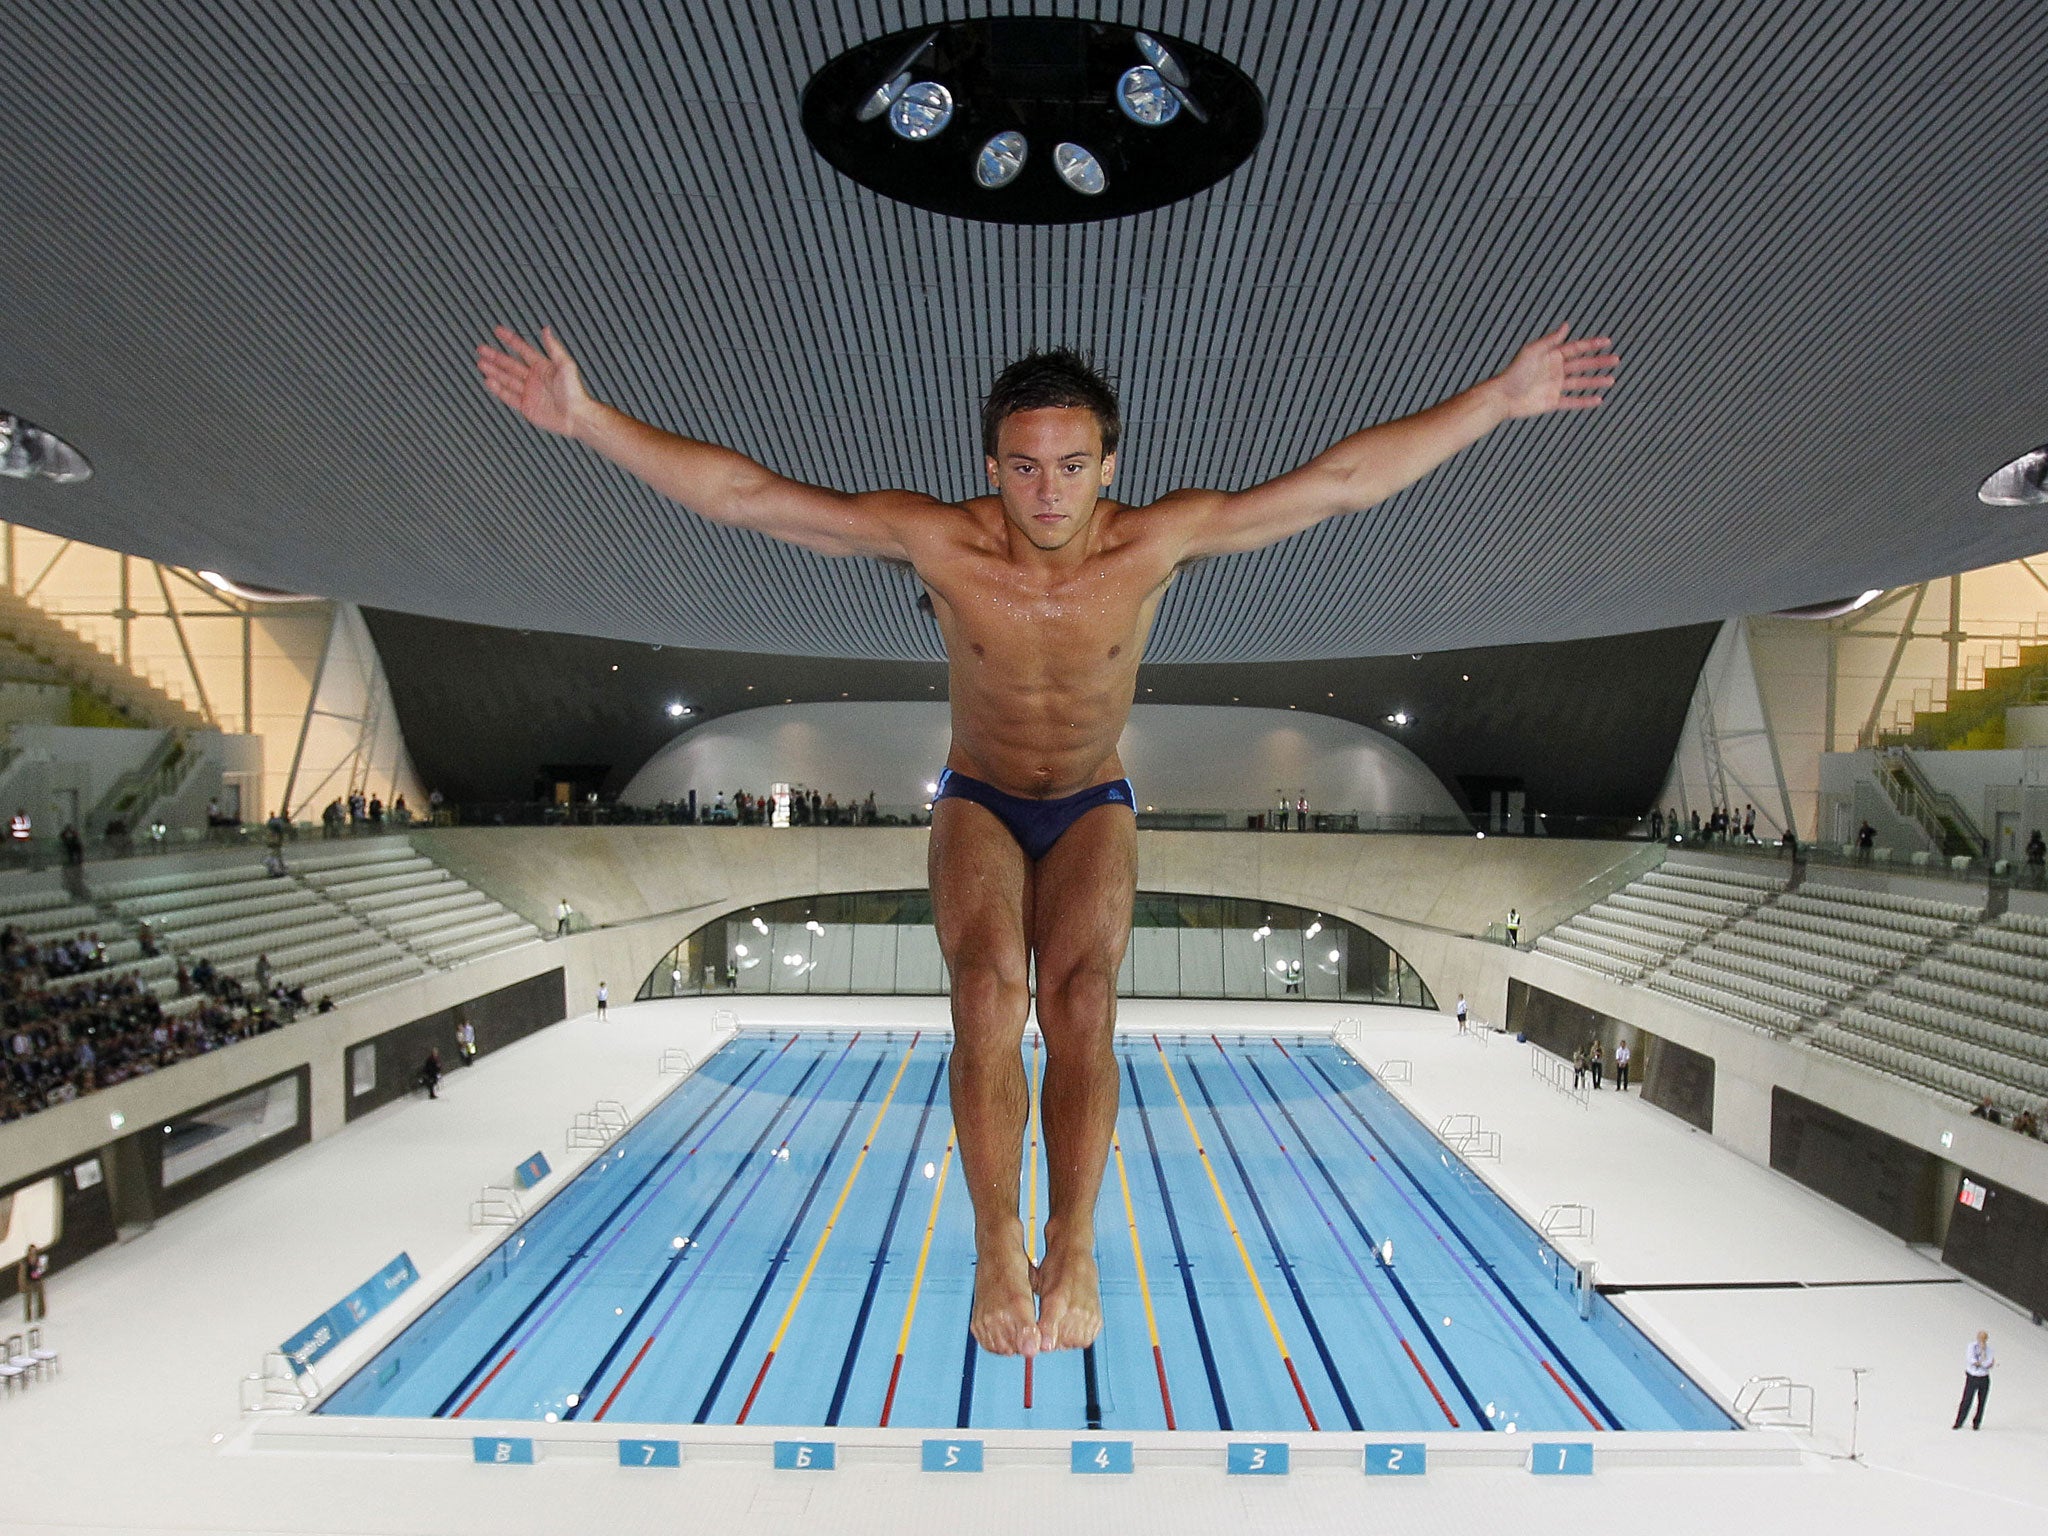 British Olympic diver Tom Daley dives into a new aquatic centre pool during the one year to go ceremony dedicated to the 2012 London Olympics, in London, on July 27, 2011.